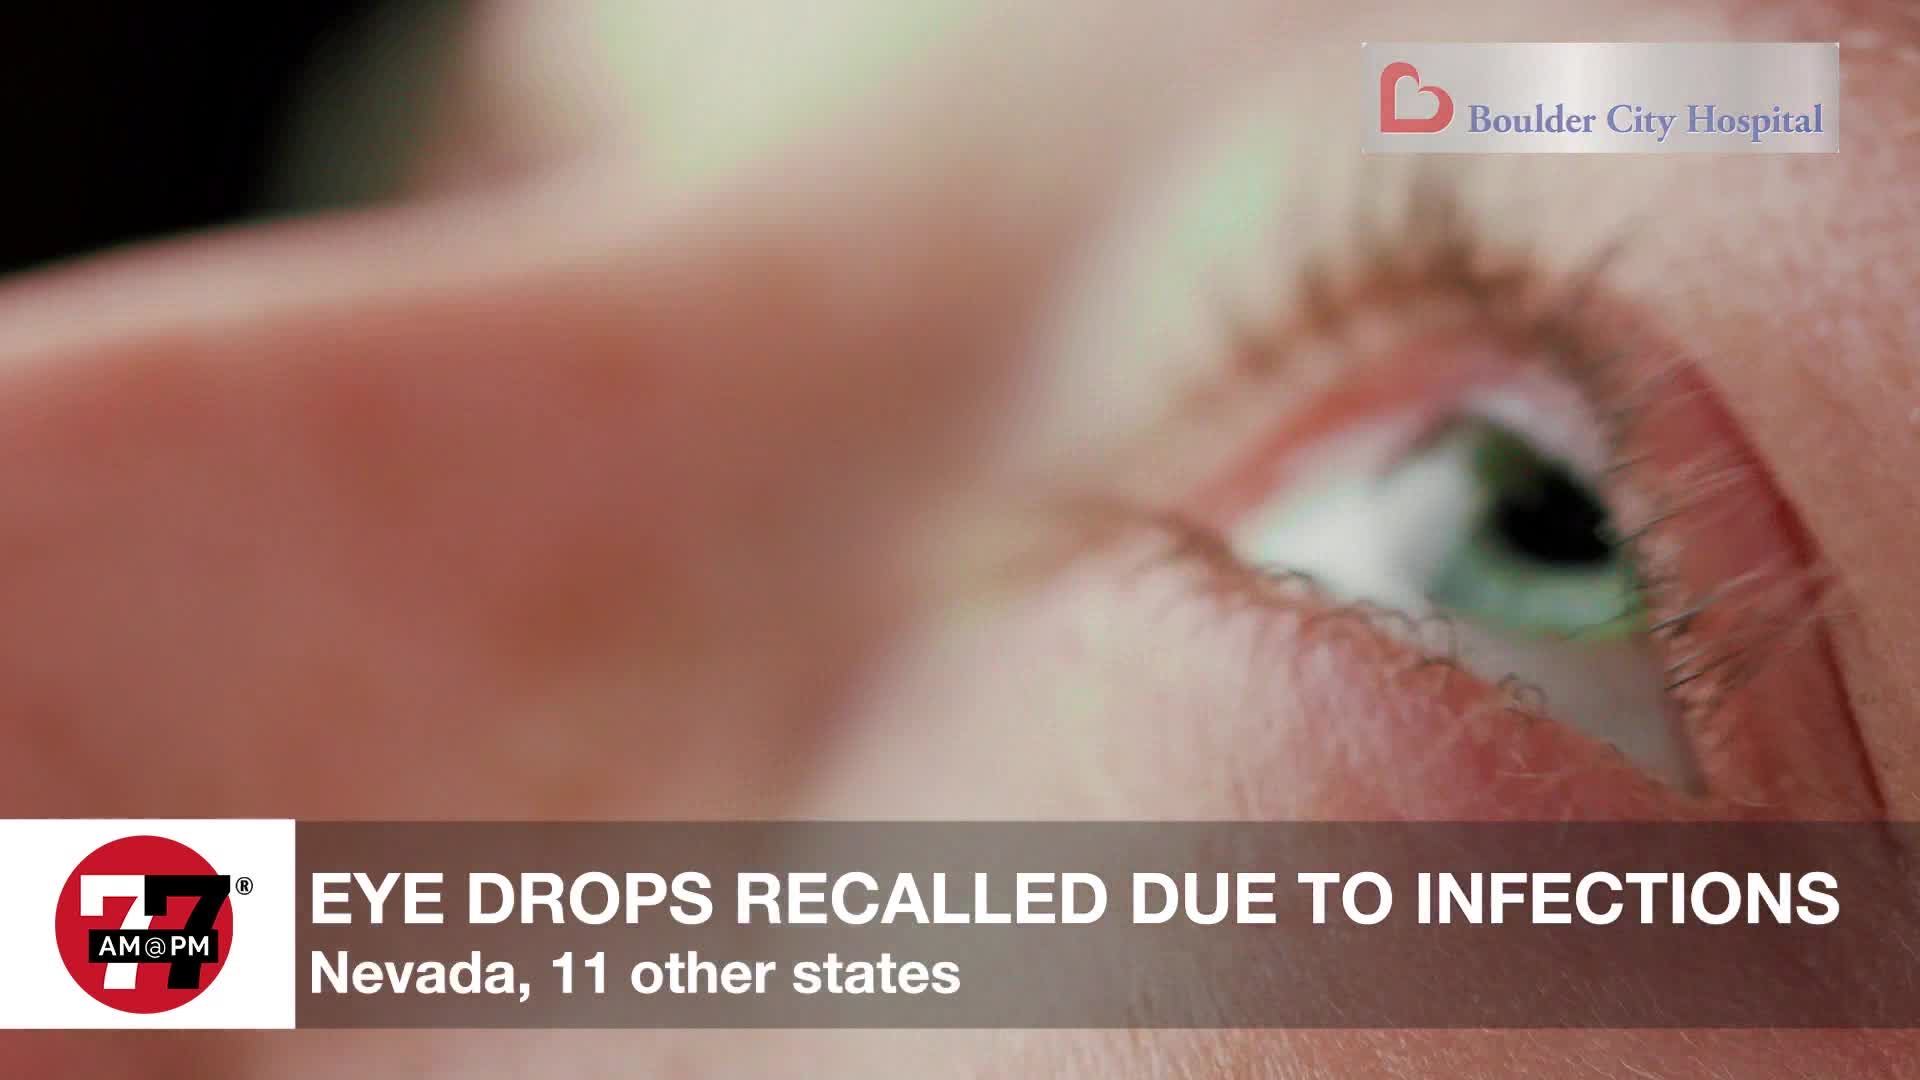 Eye drops recalled in Nevada due to infections